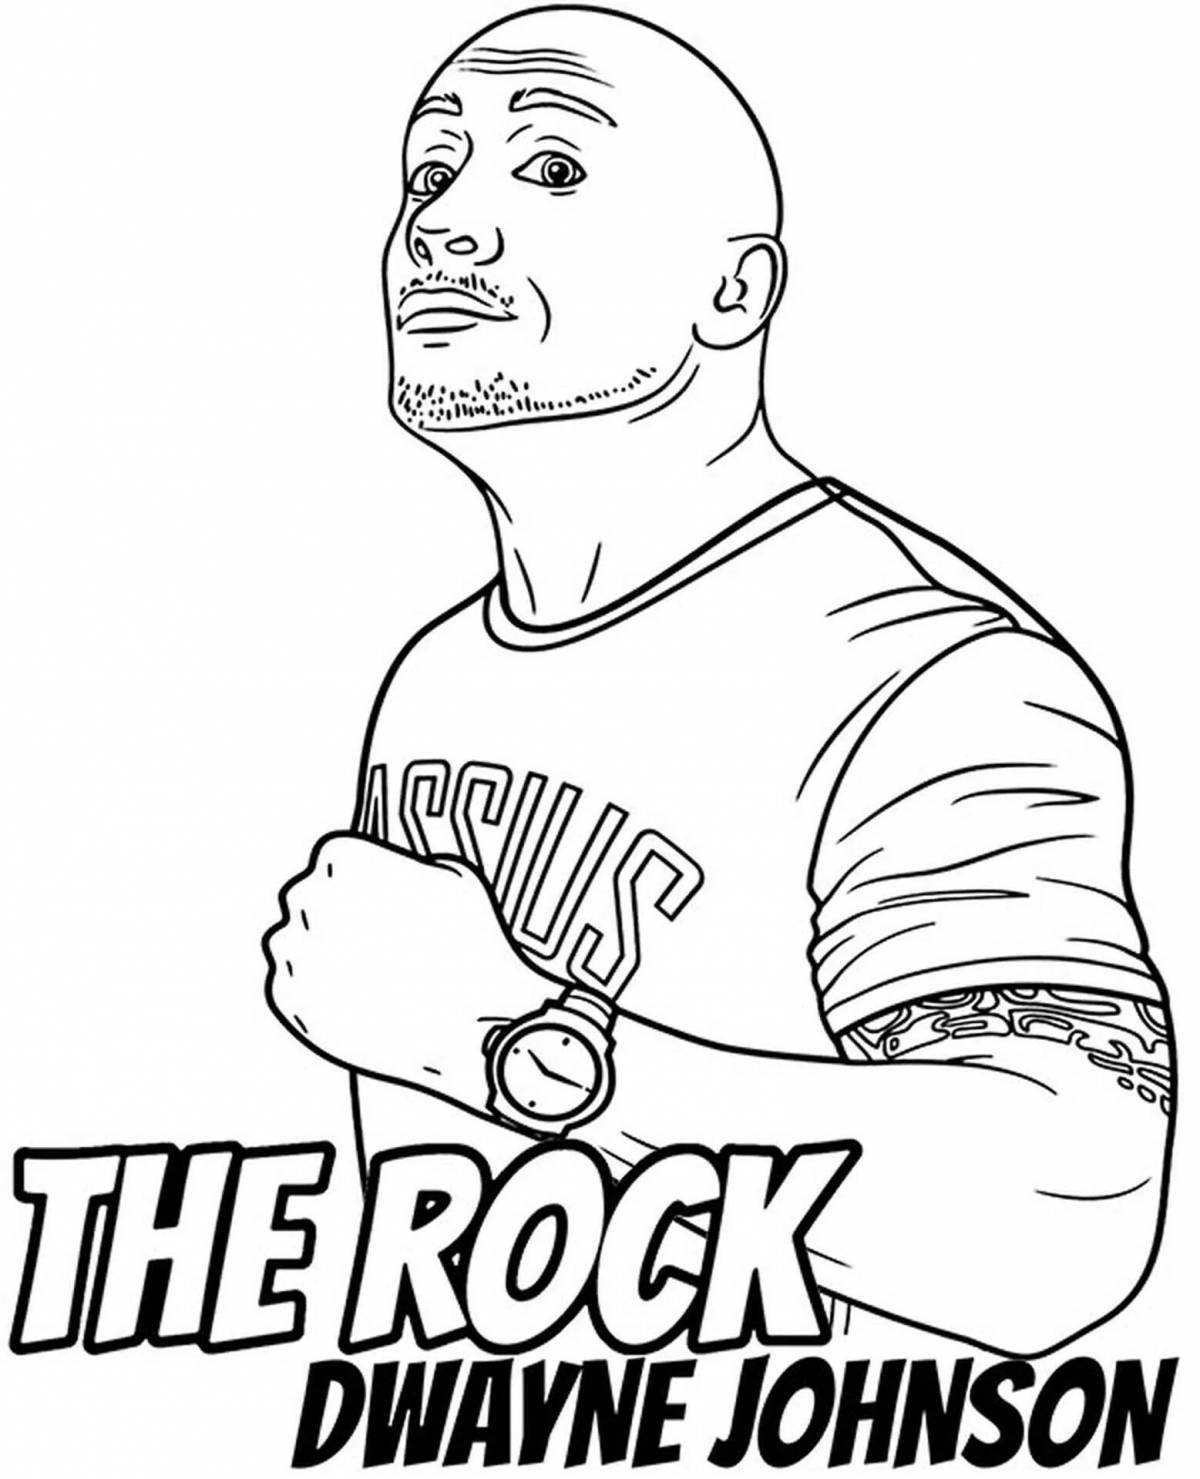 Rock johnson's awesome coloring book